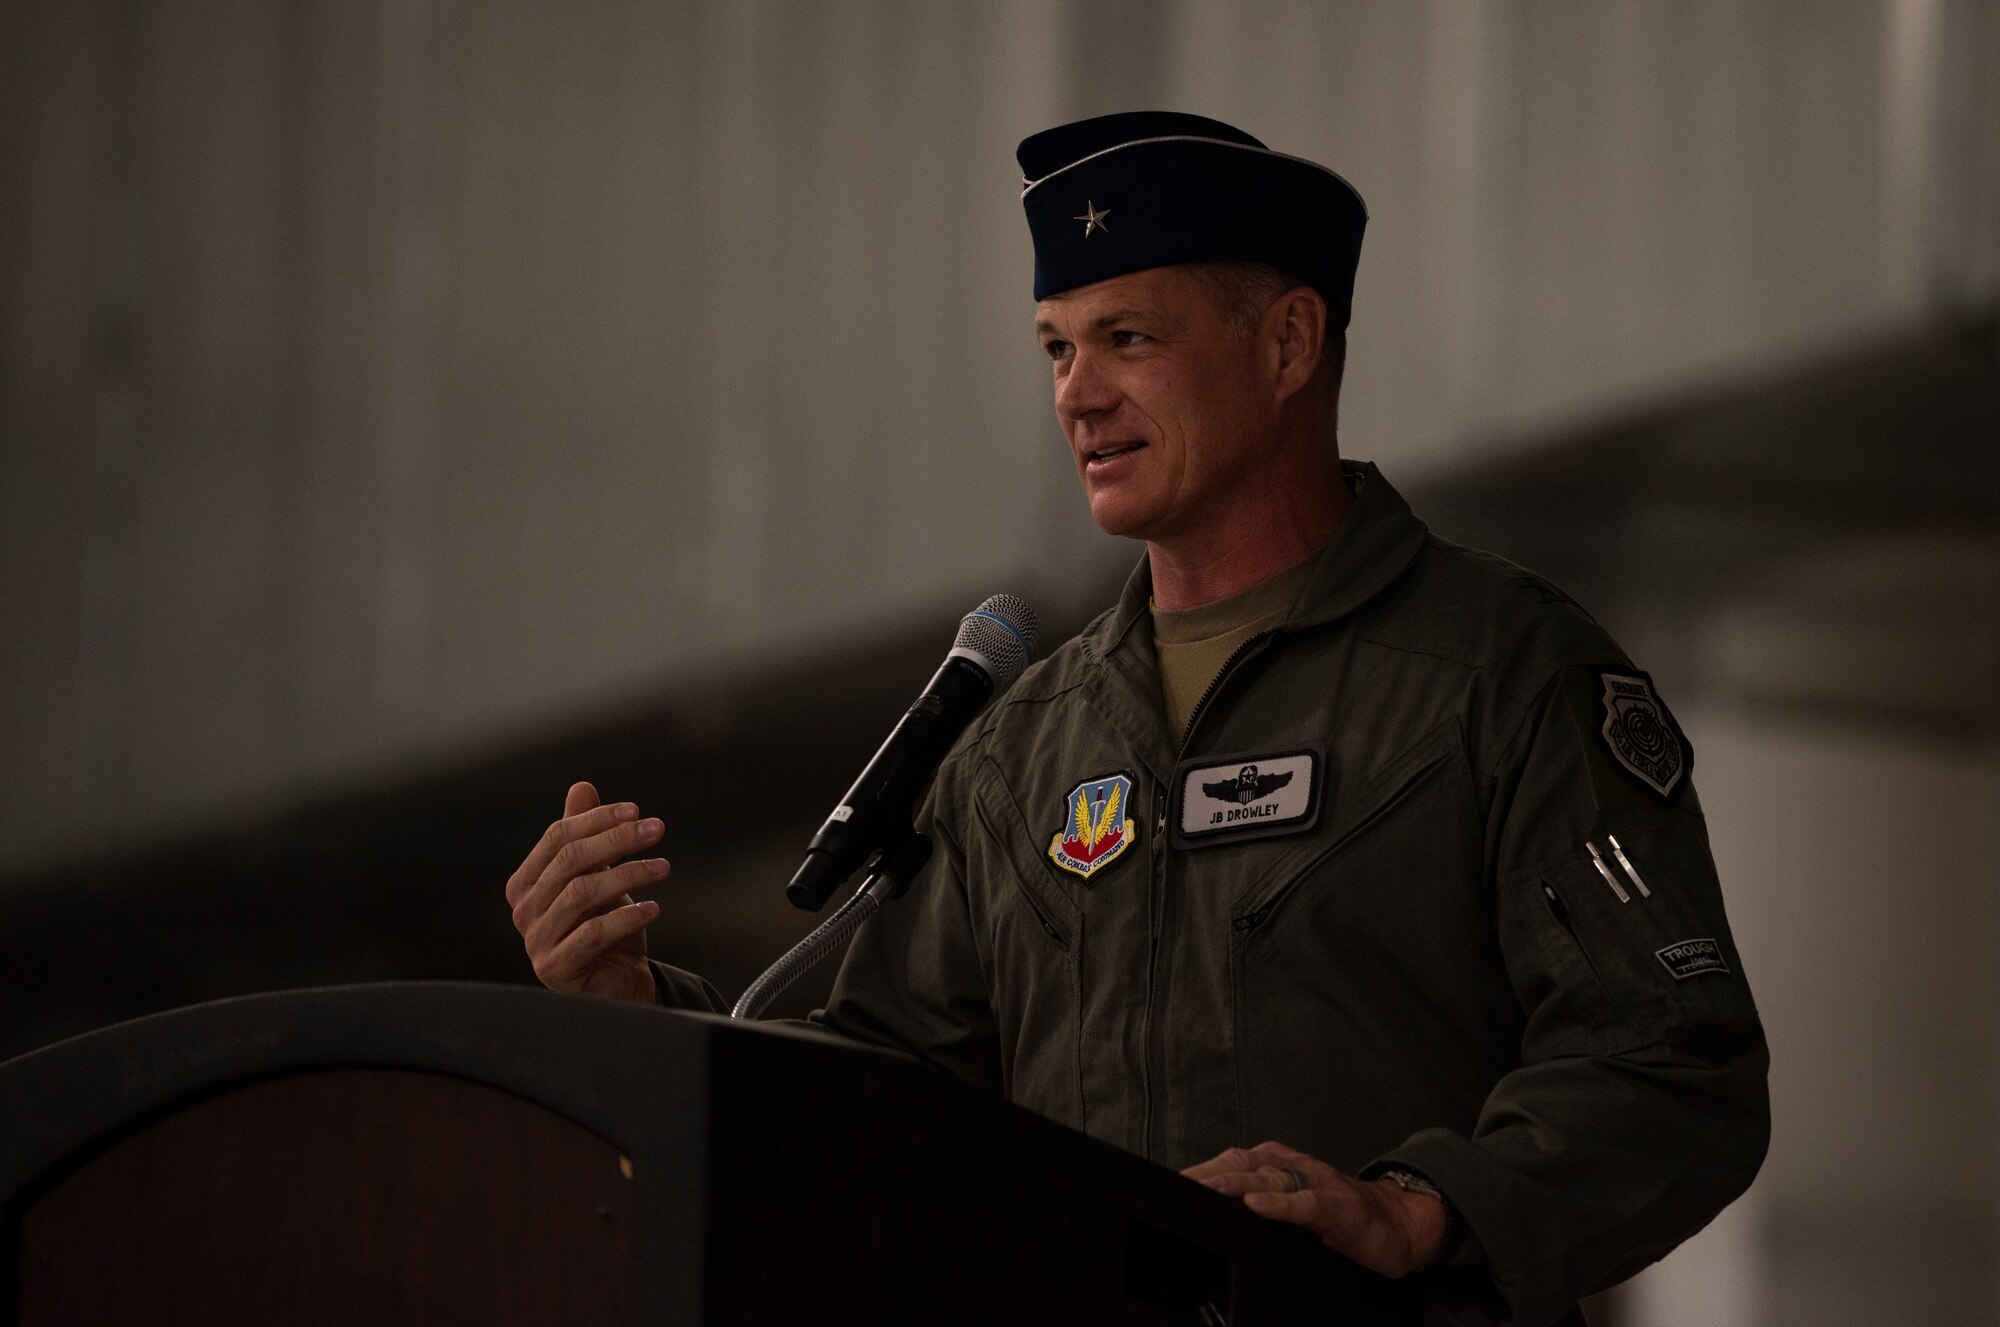 Brig. Gen. Michael Drowley stands at a podium and talks to the crowd during a ceremony.